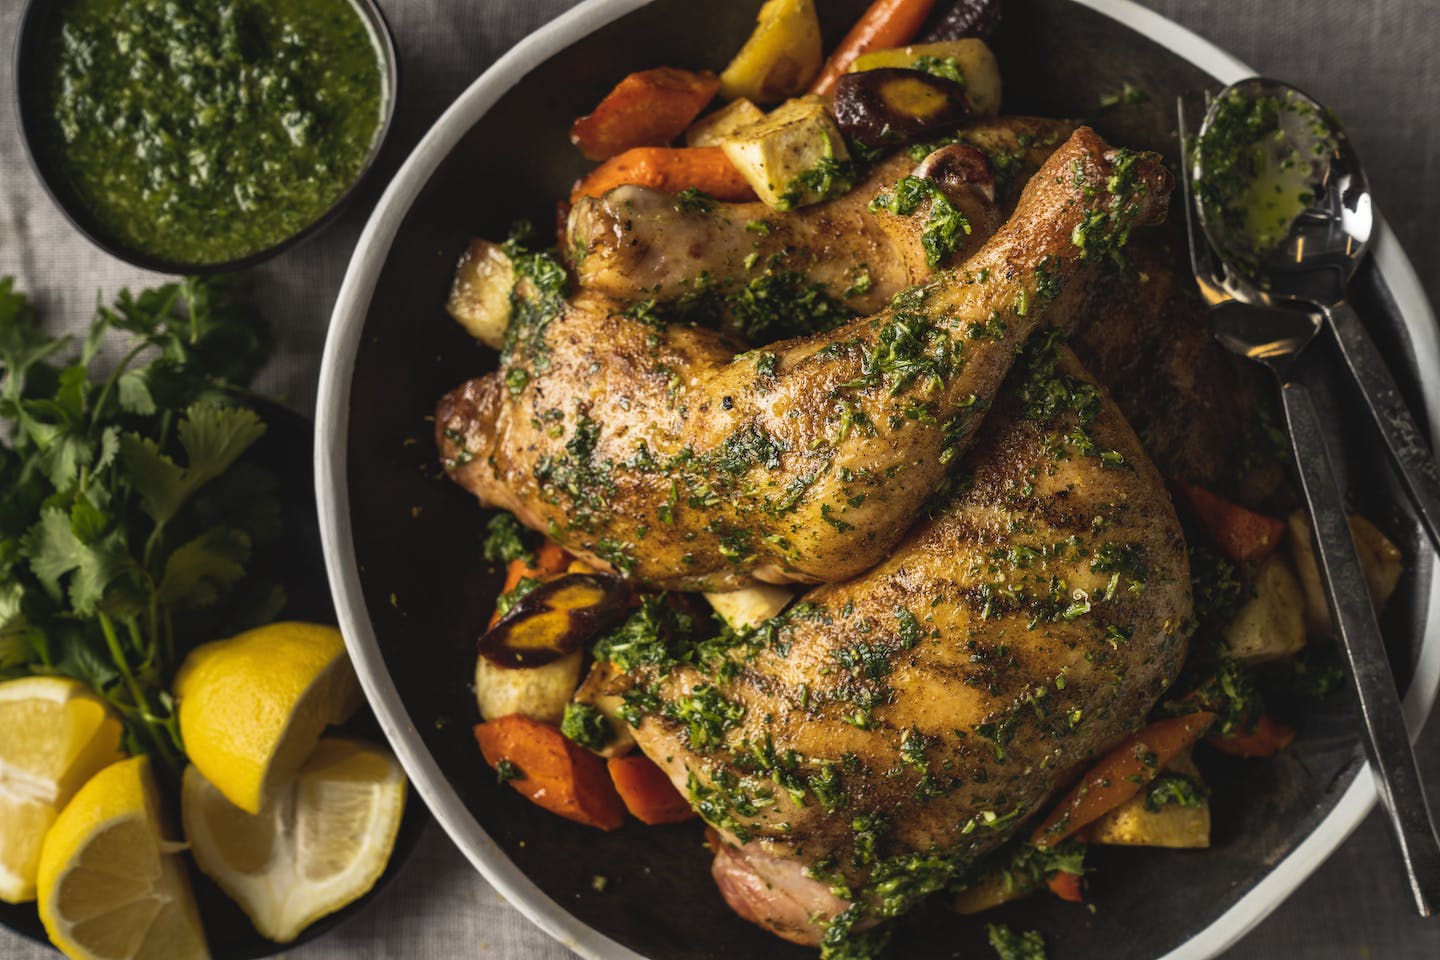 Moroccan-Spiced Roasted Chicken with Root Vegetables and Chermoula